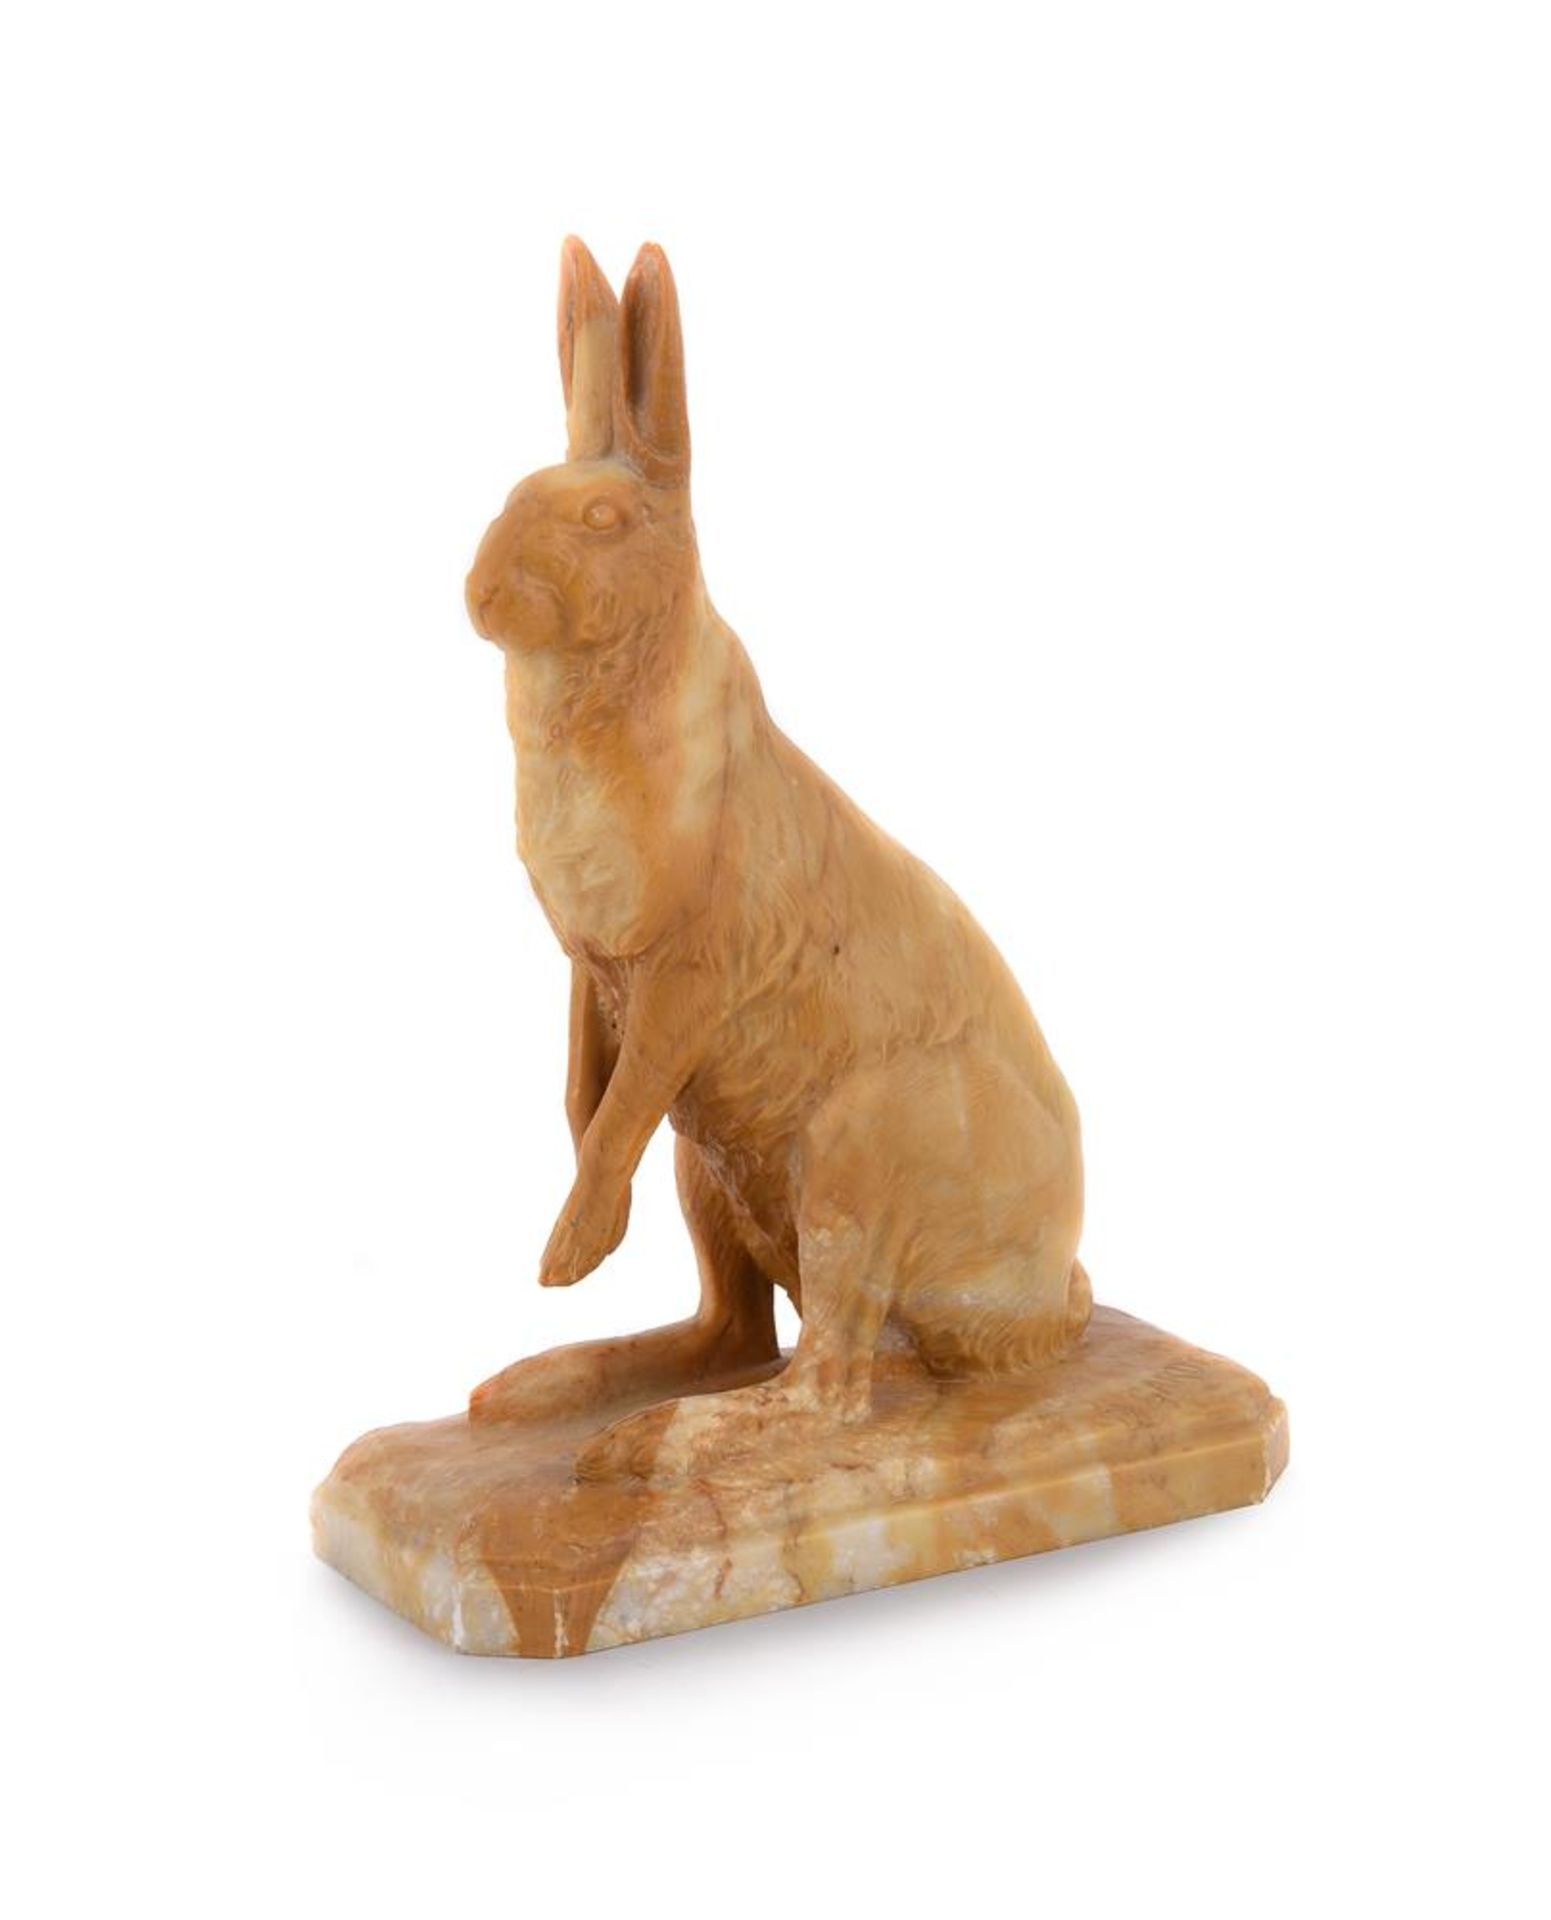 GEORGES GARDET (FRENCH, 1863-1939), A CARVED SIENA MARBLE MODEL OF A SEATED HARE